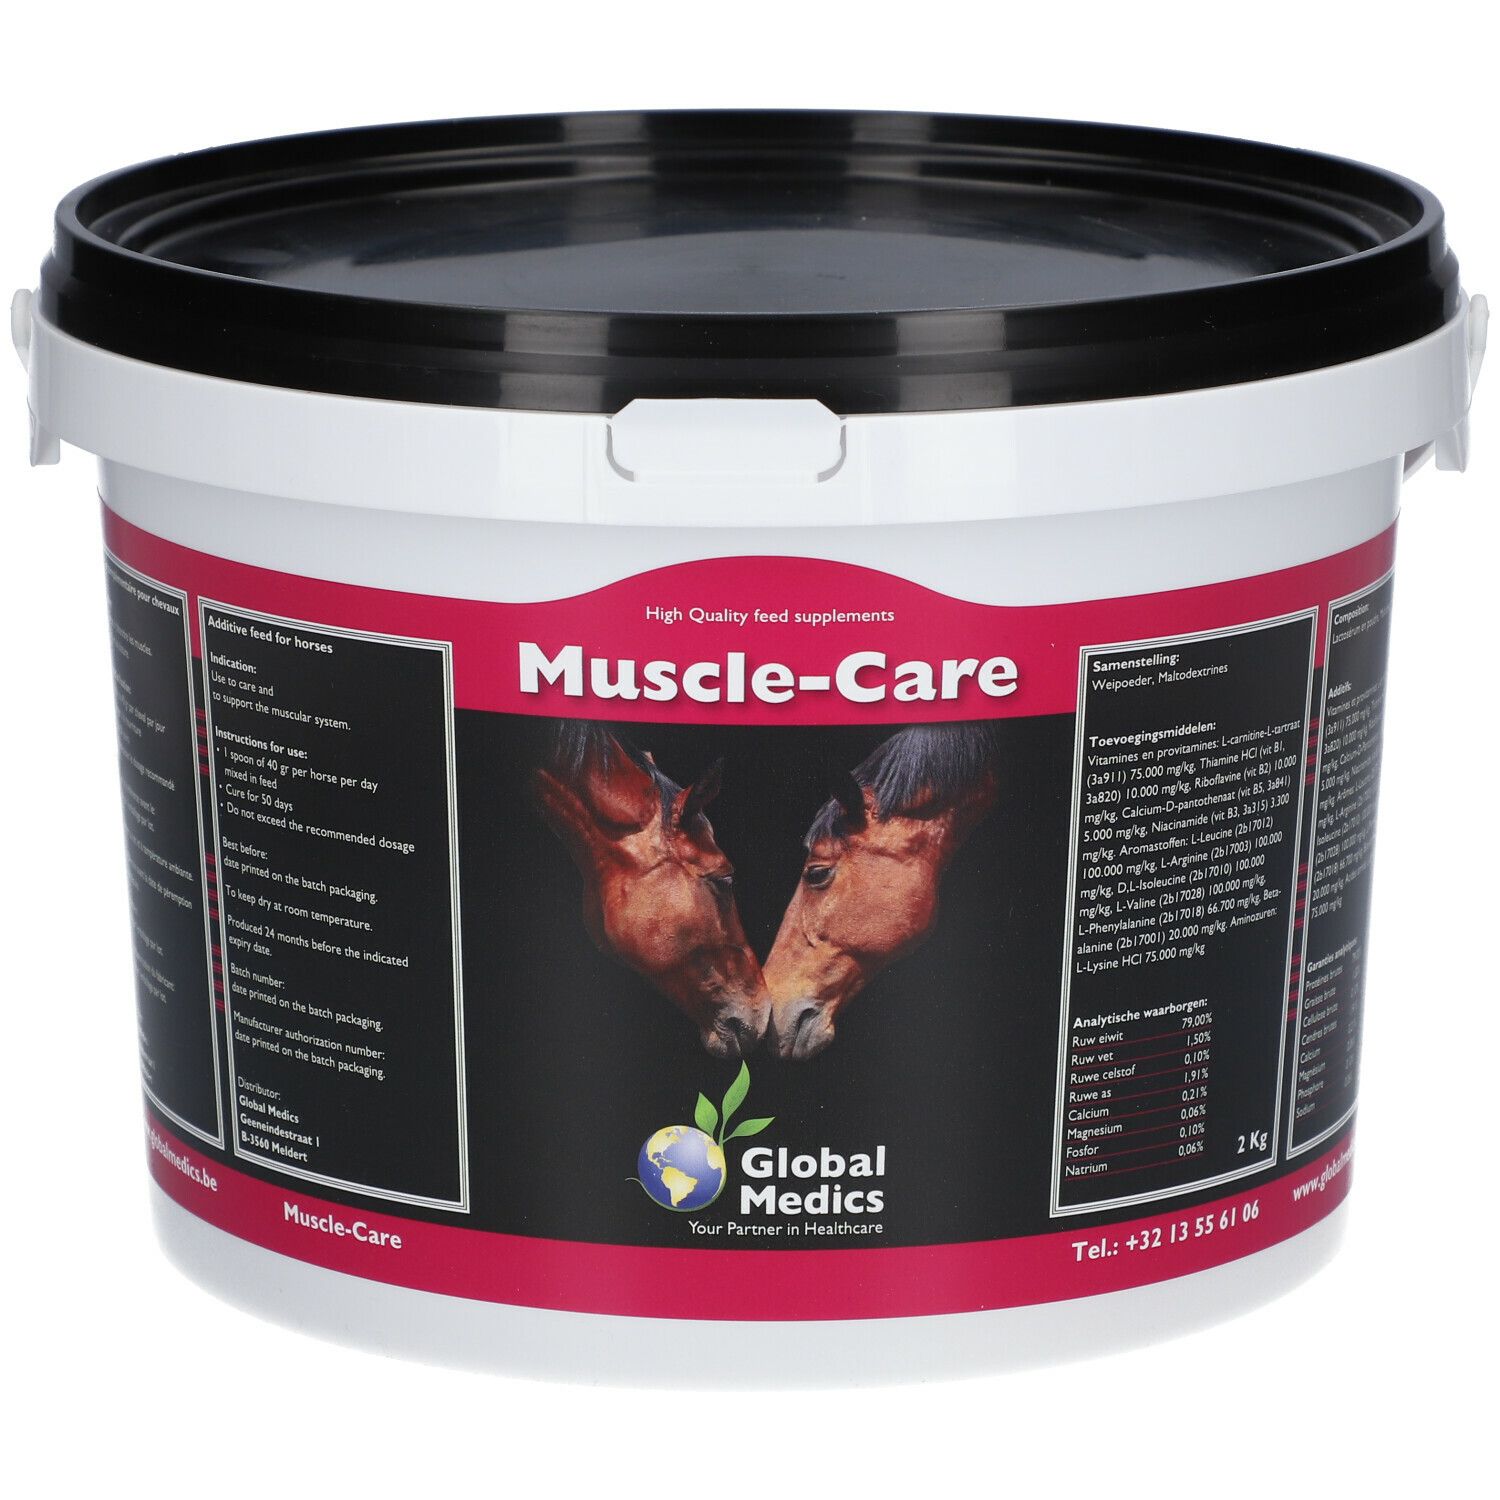 GLOBAL MEDICS Muscle-Care Pulver